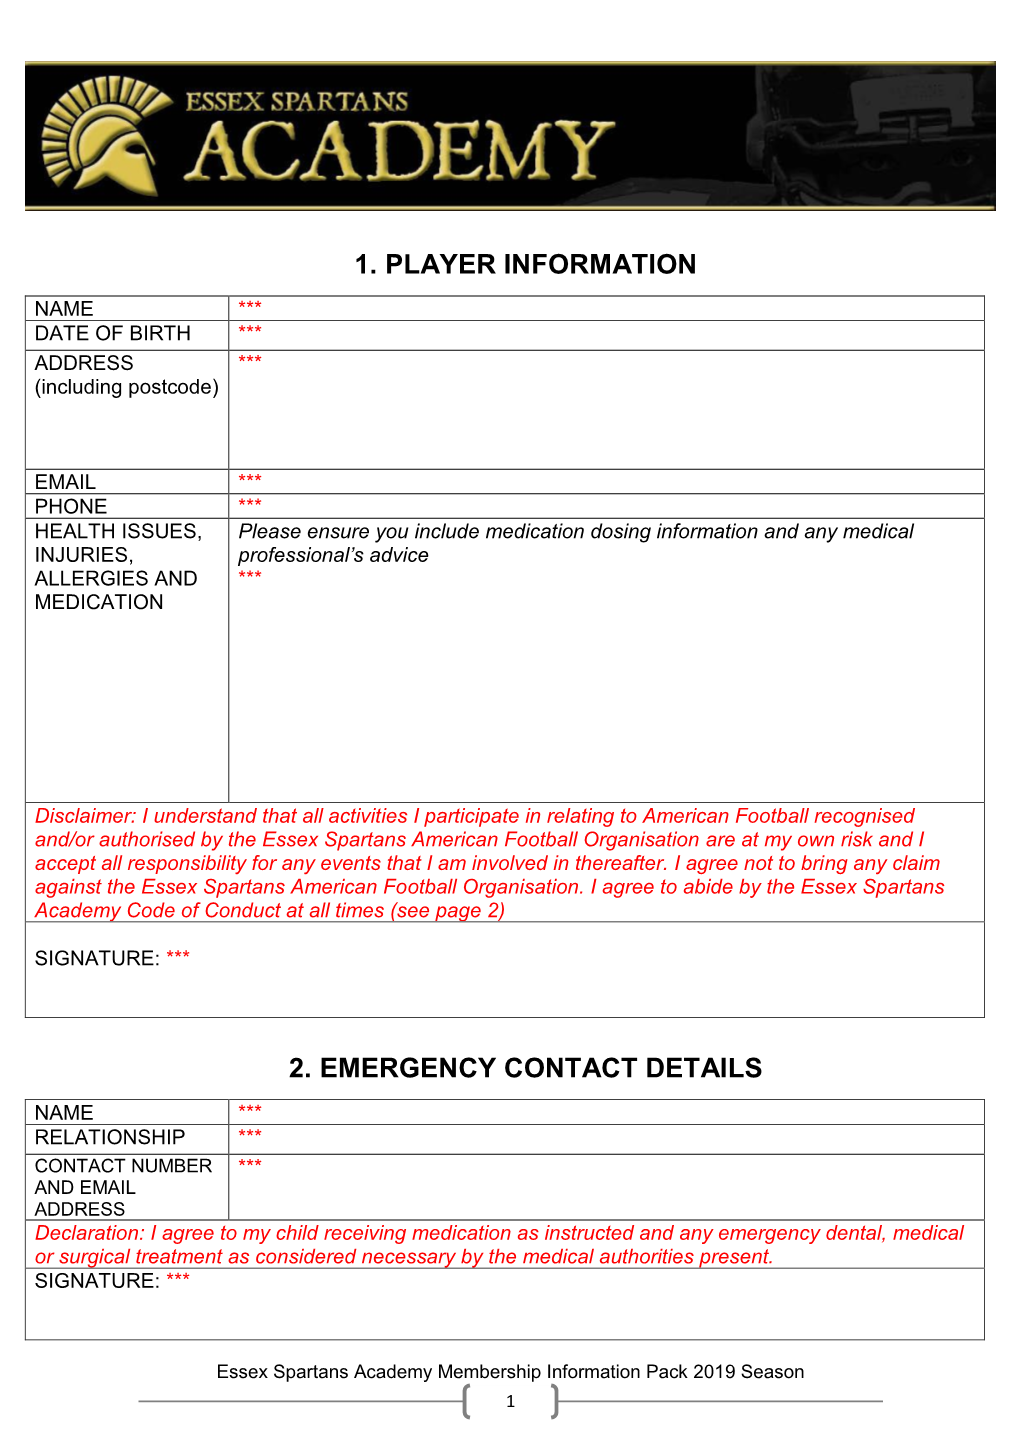 1. Player Information 2. Emergency Contact Details